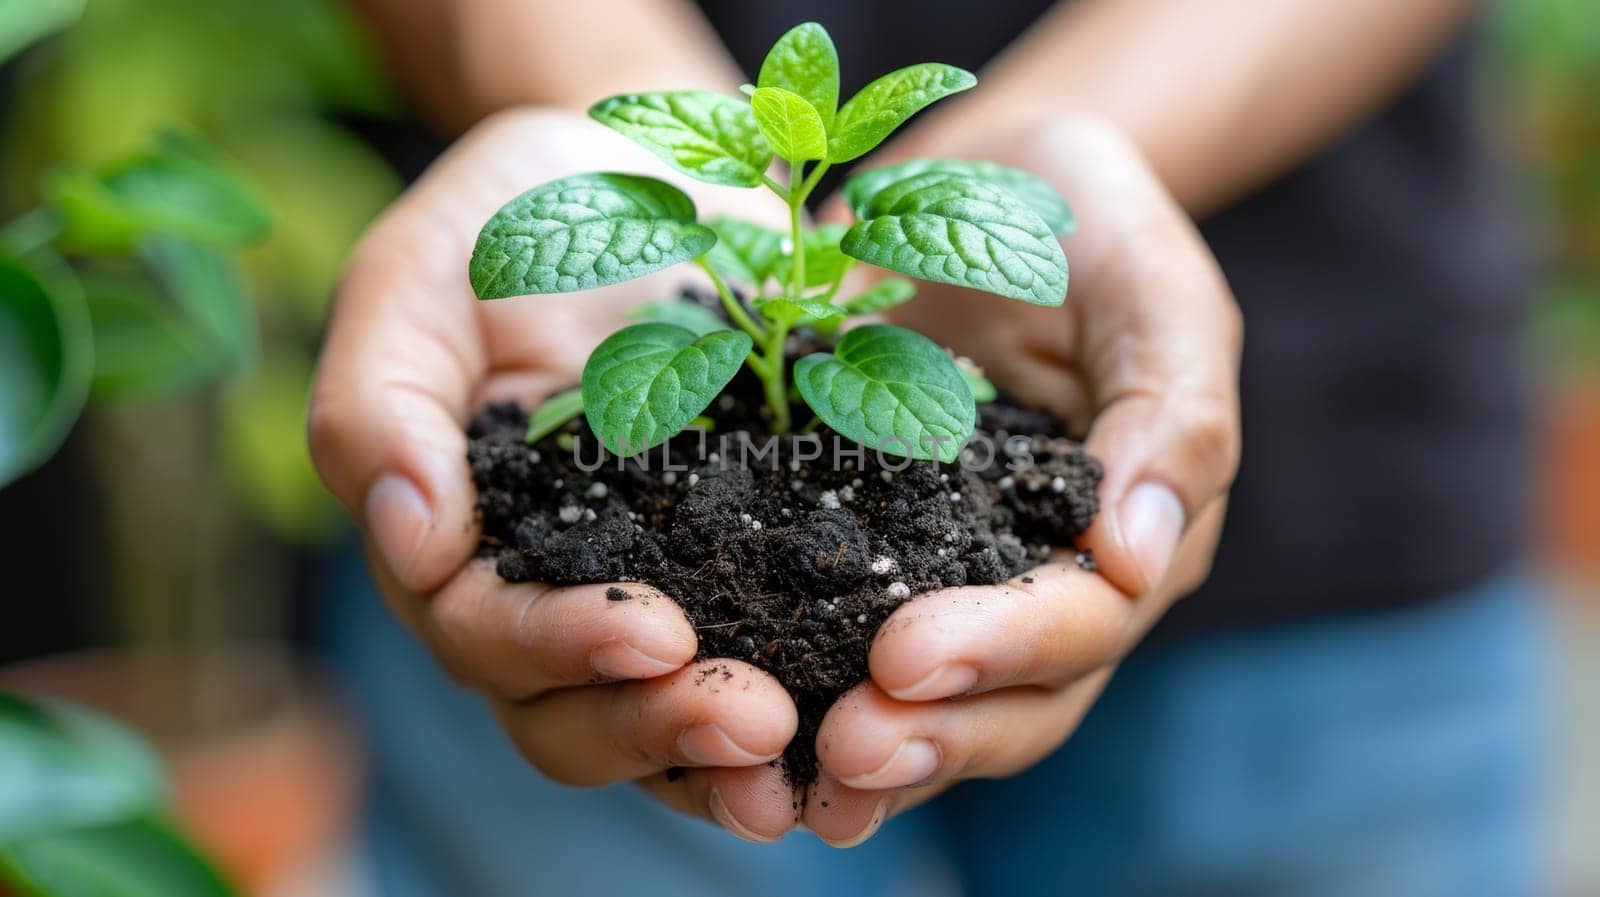 A person holding a small plant in their hands with dirt, AI by starush